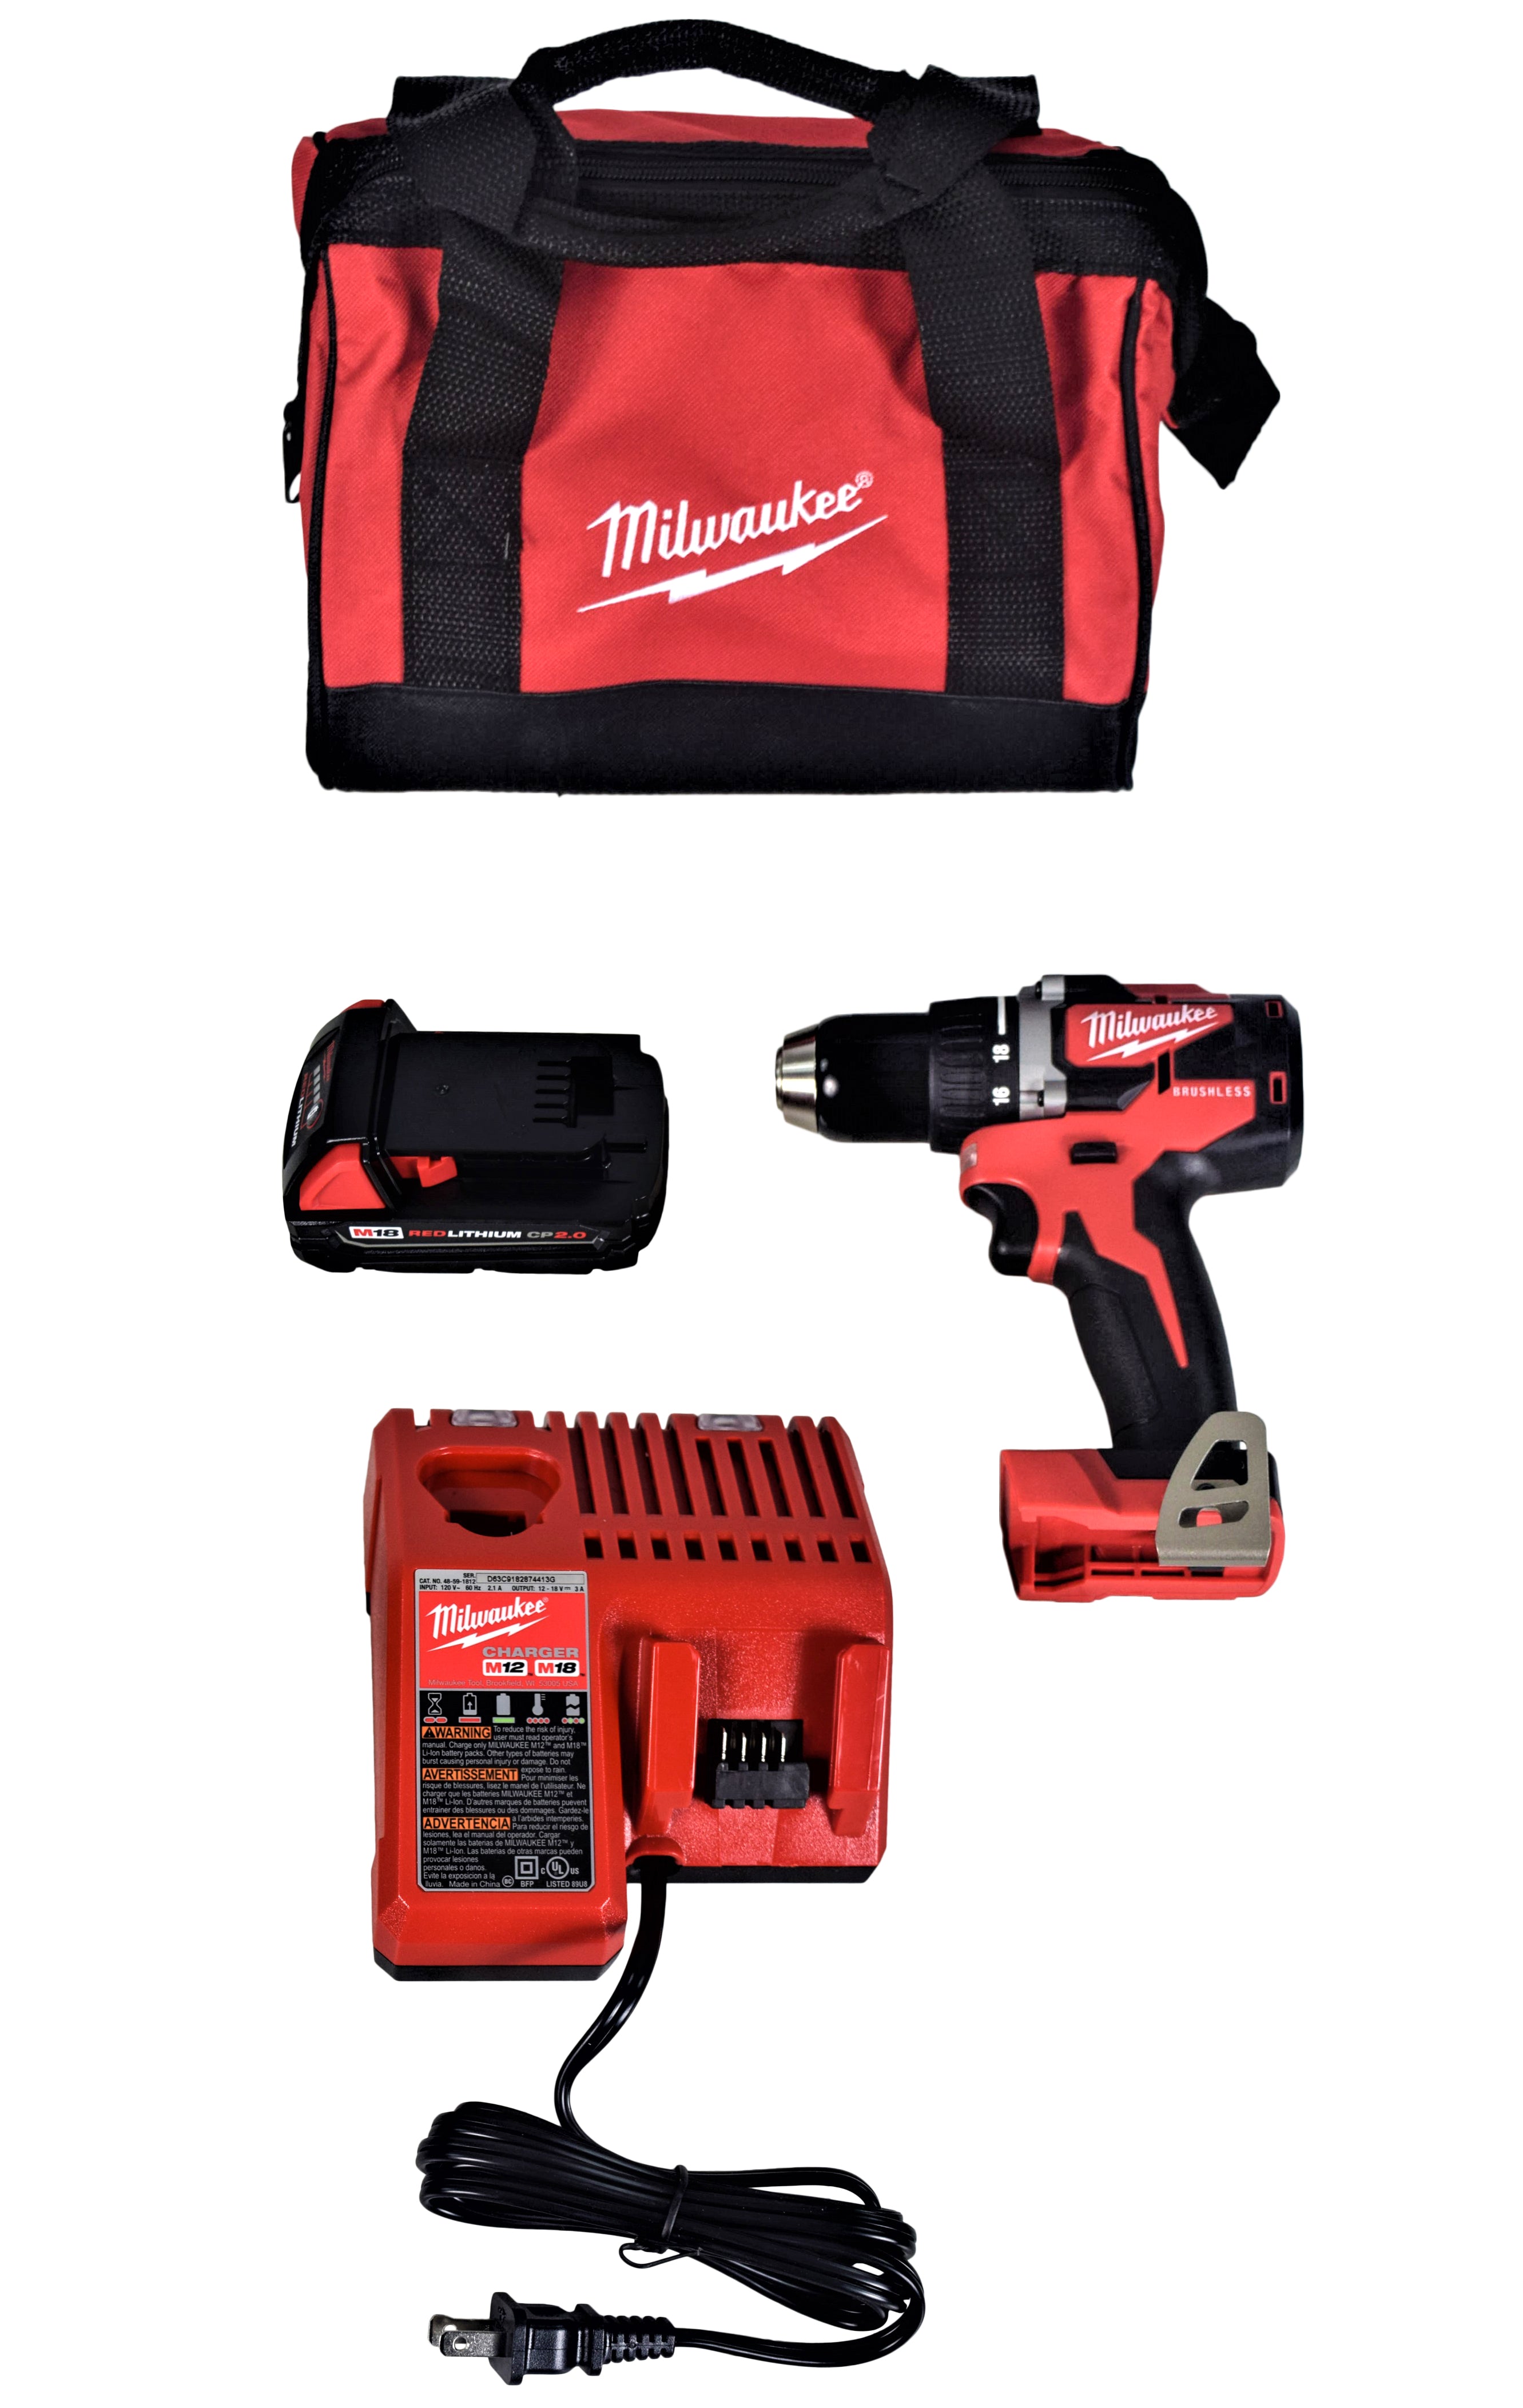 Milwaukee-2801-21P-M18-18-Volt-Lithium-Ion-Compact-Brushless-Cordless-1-2-in.-Drill-Driver-Kit-image-1